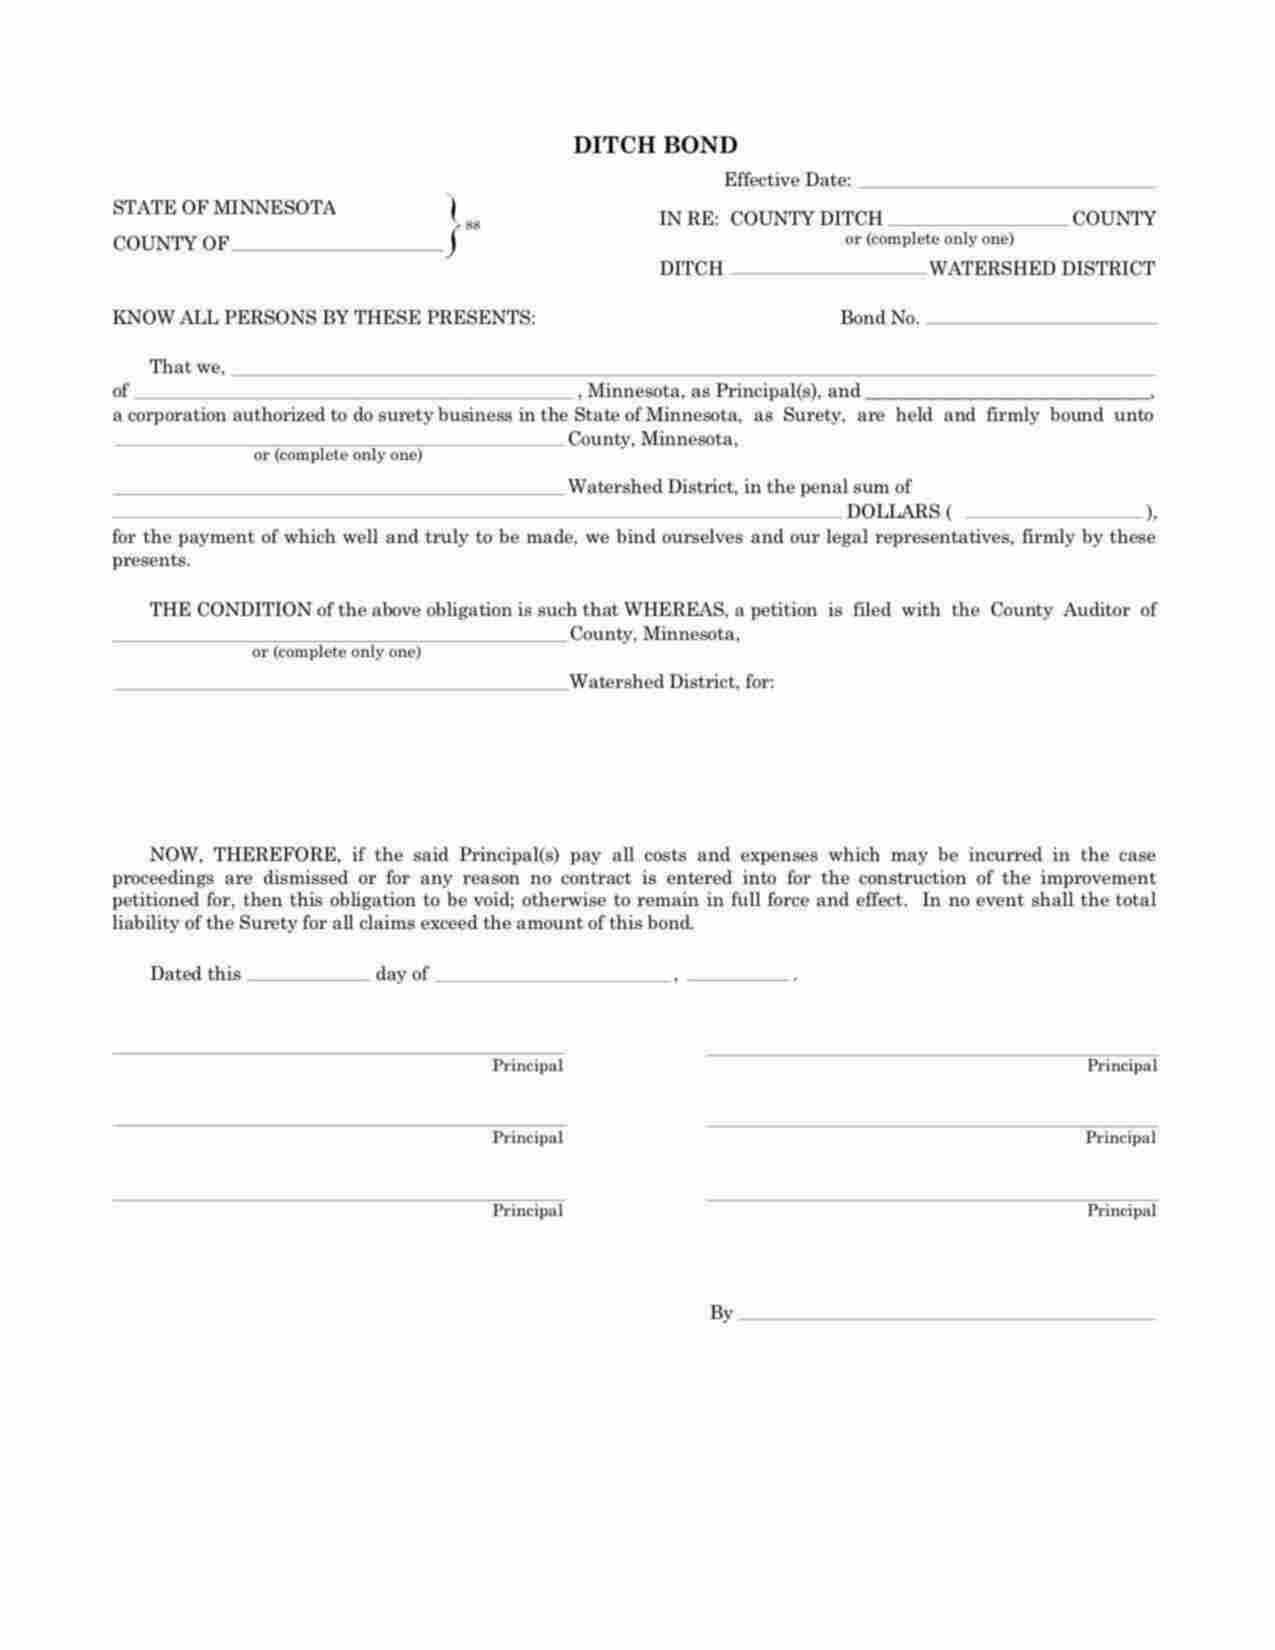 Minnesota Ditch Petition - Watershed District Bond Form